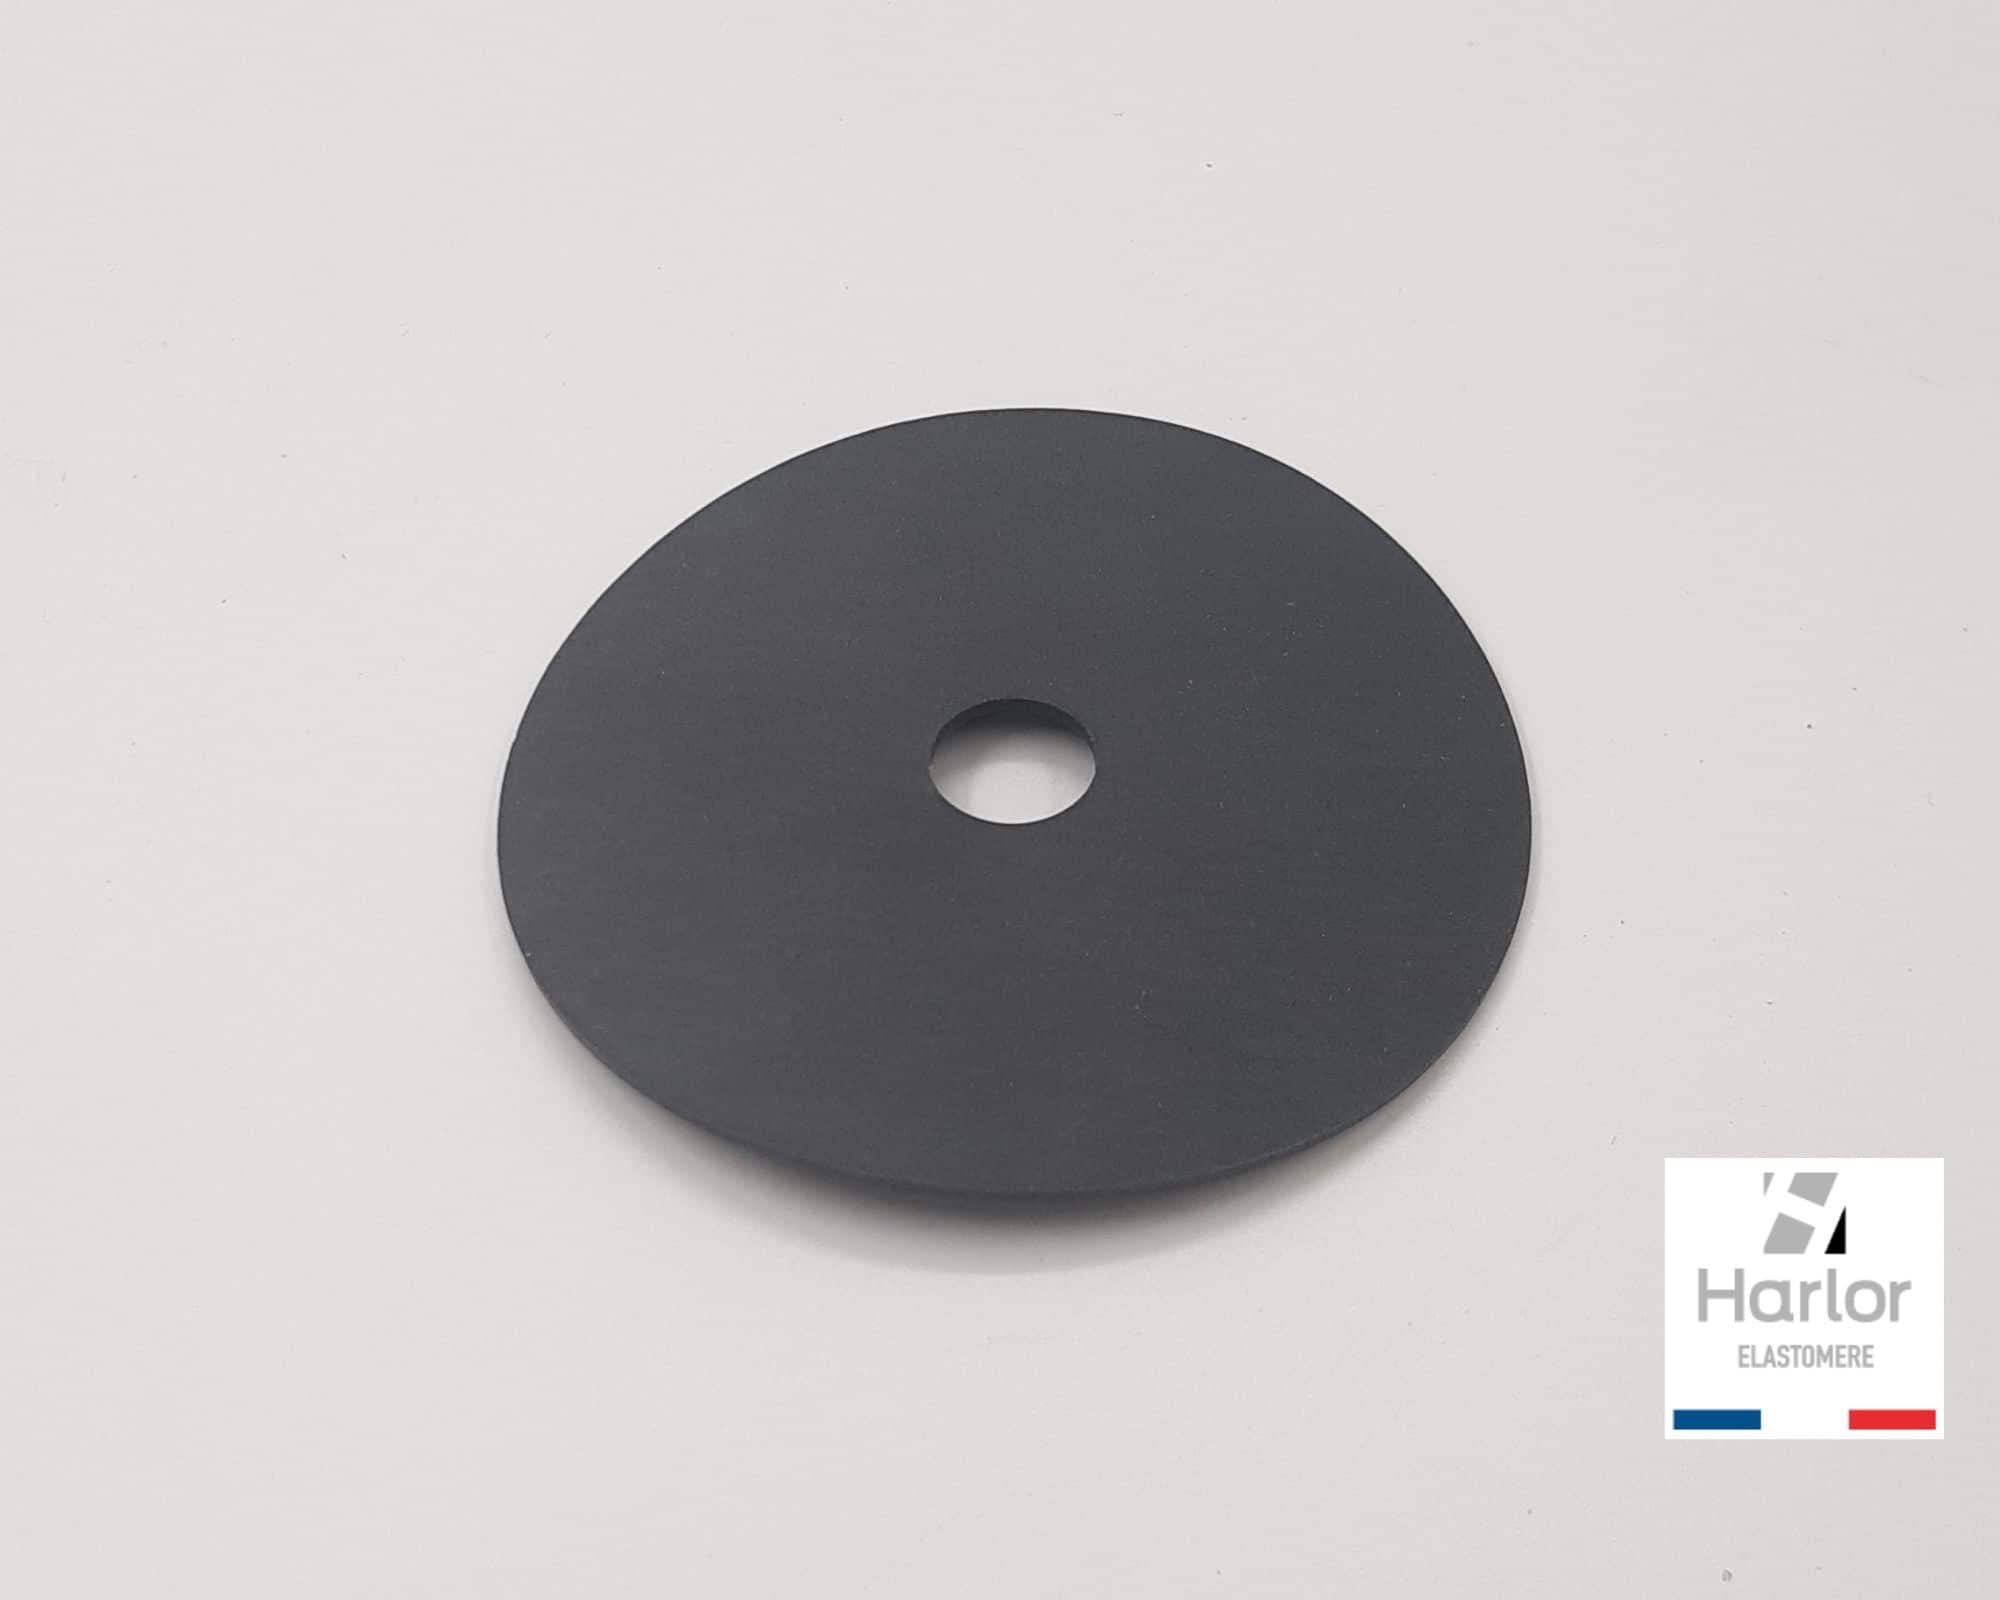 HARLOR ELASTOMERE - JOINT PTFE CHARGE VERRE GRAPHITE